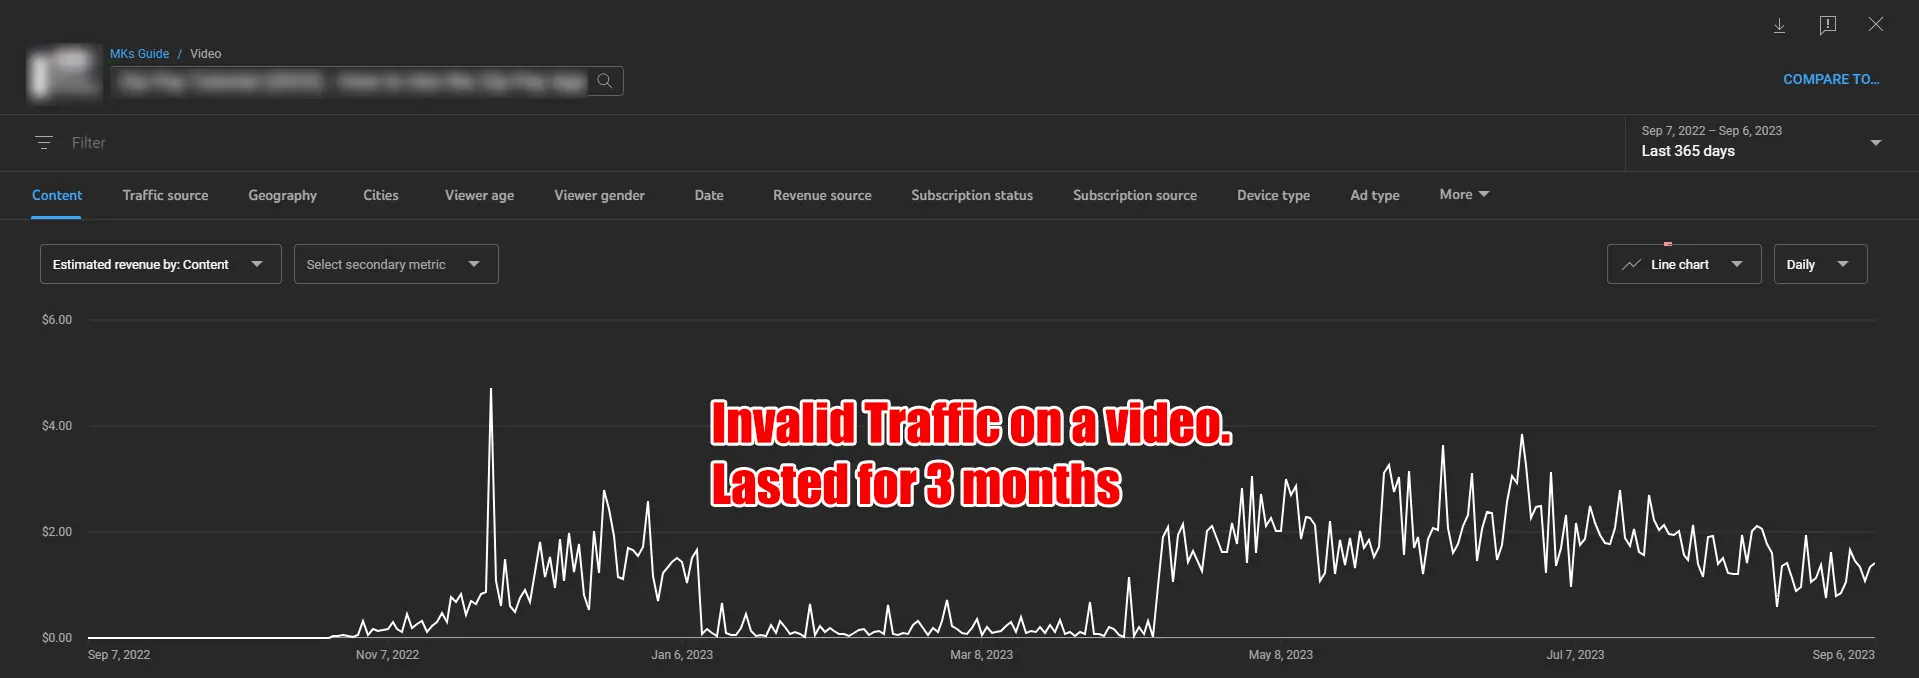 YouTube Invalid Traffic on a video